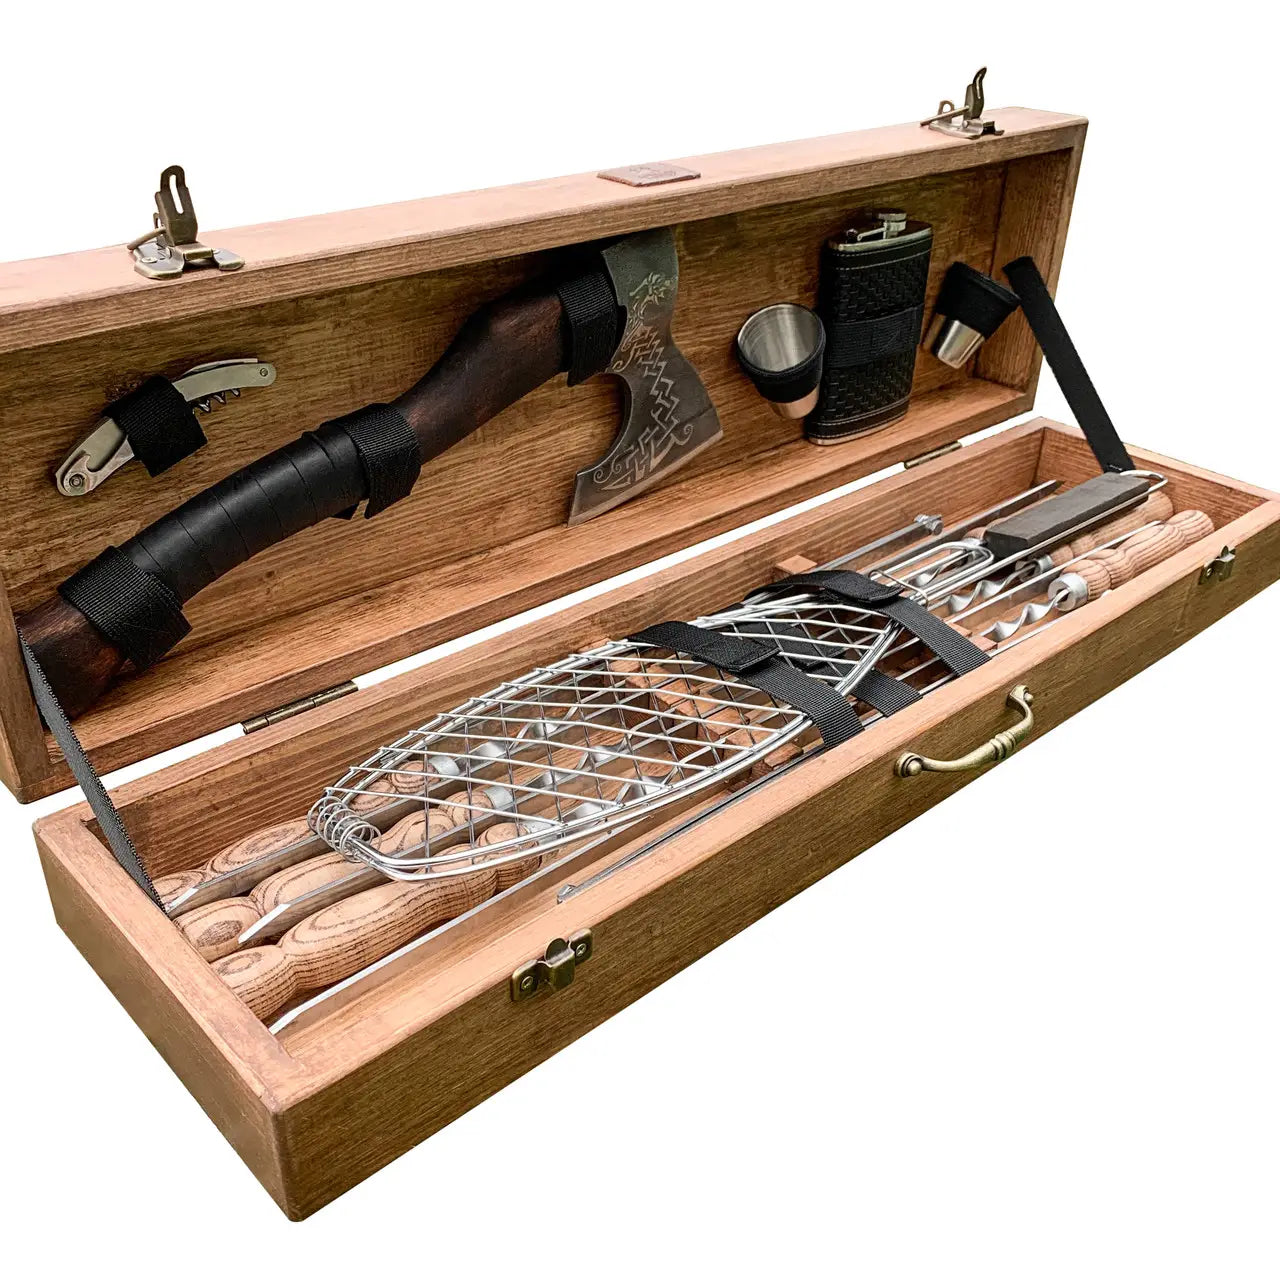 Outdoor BBQ Skewers Set "Panther" in a Wooden Case, 18 item